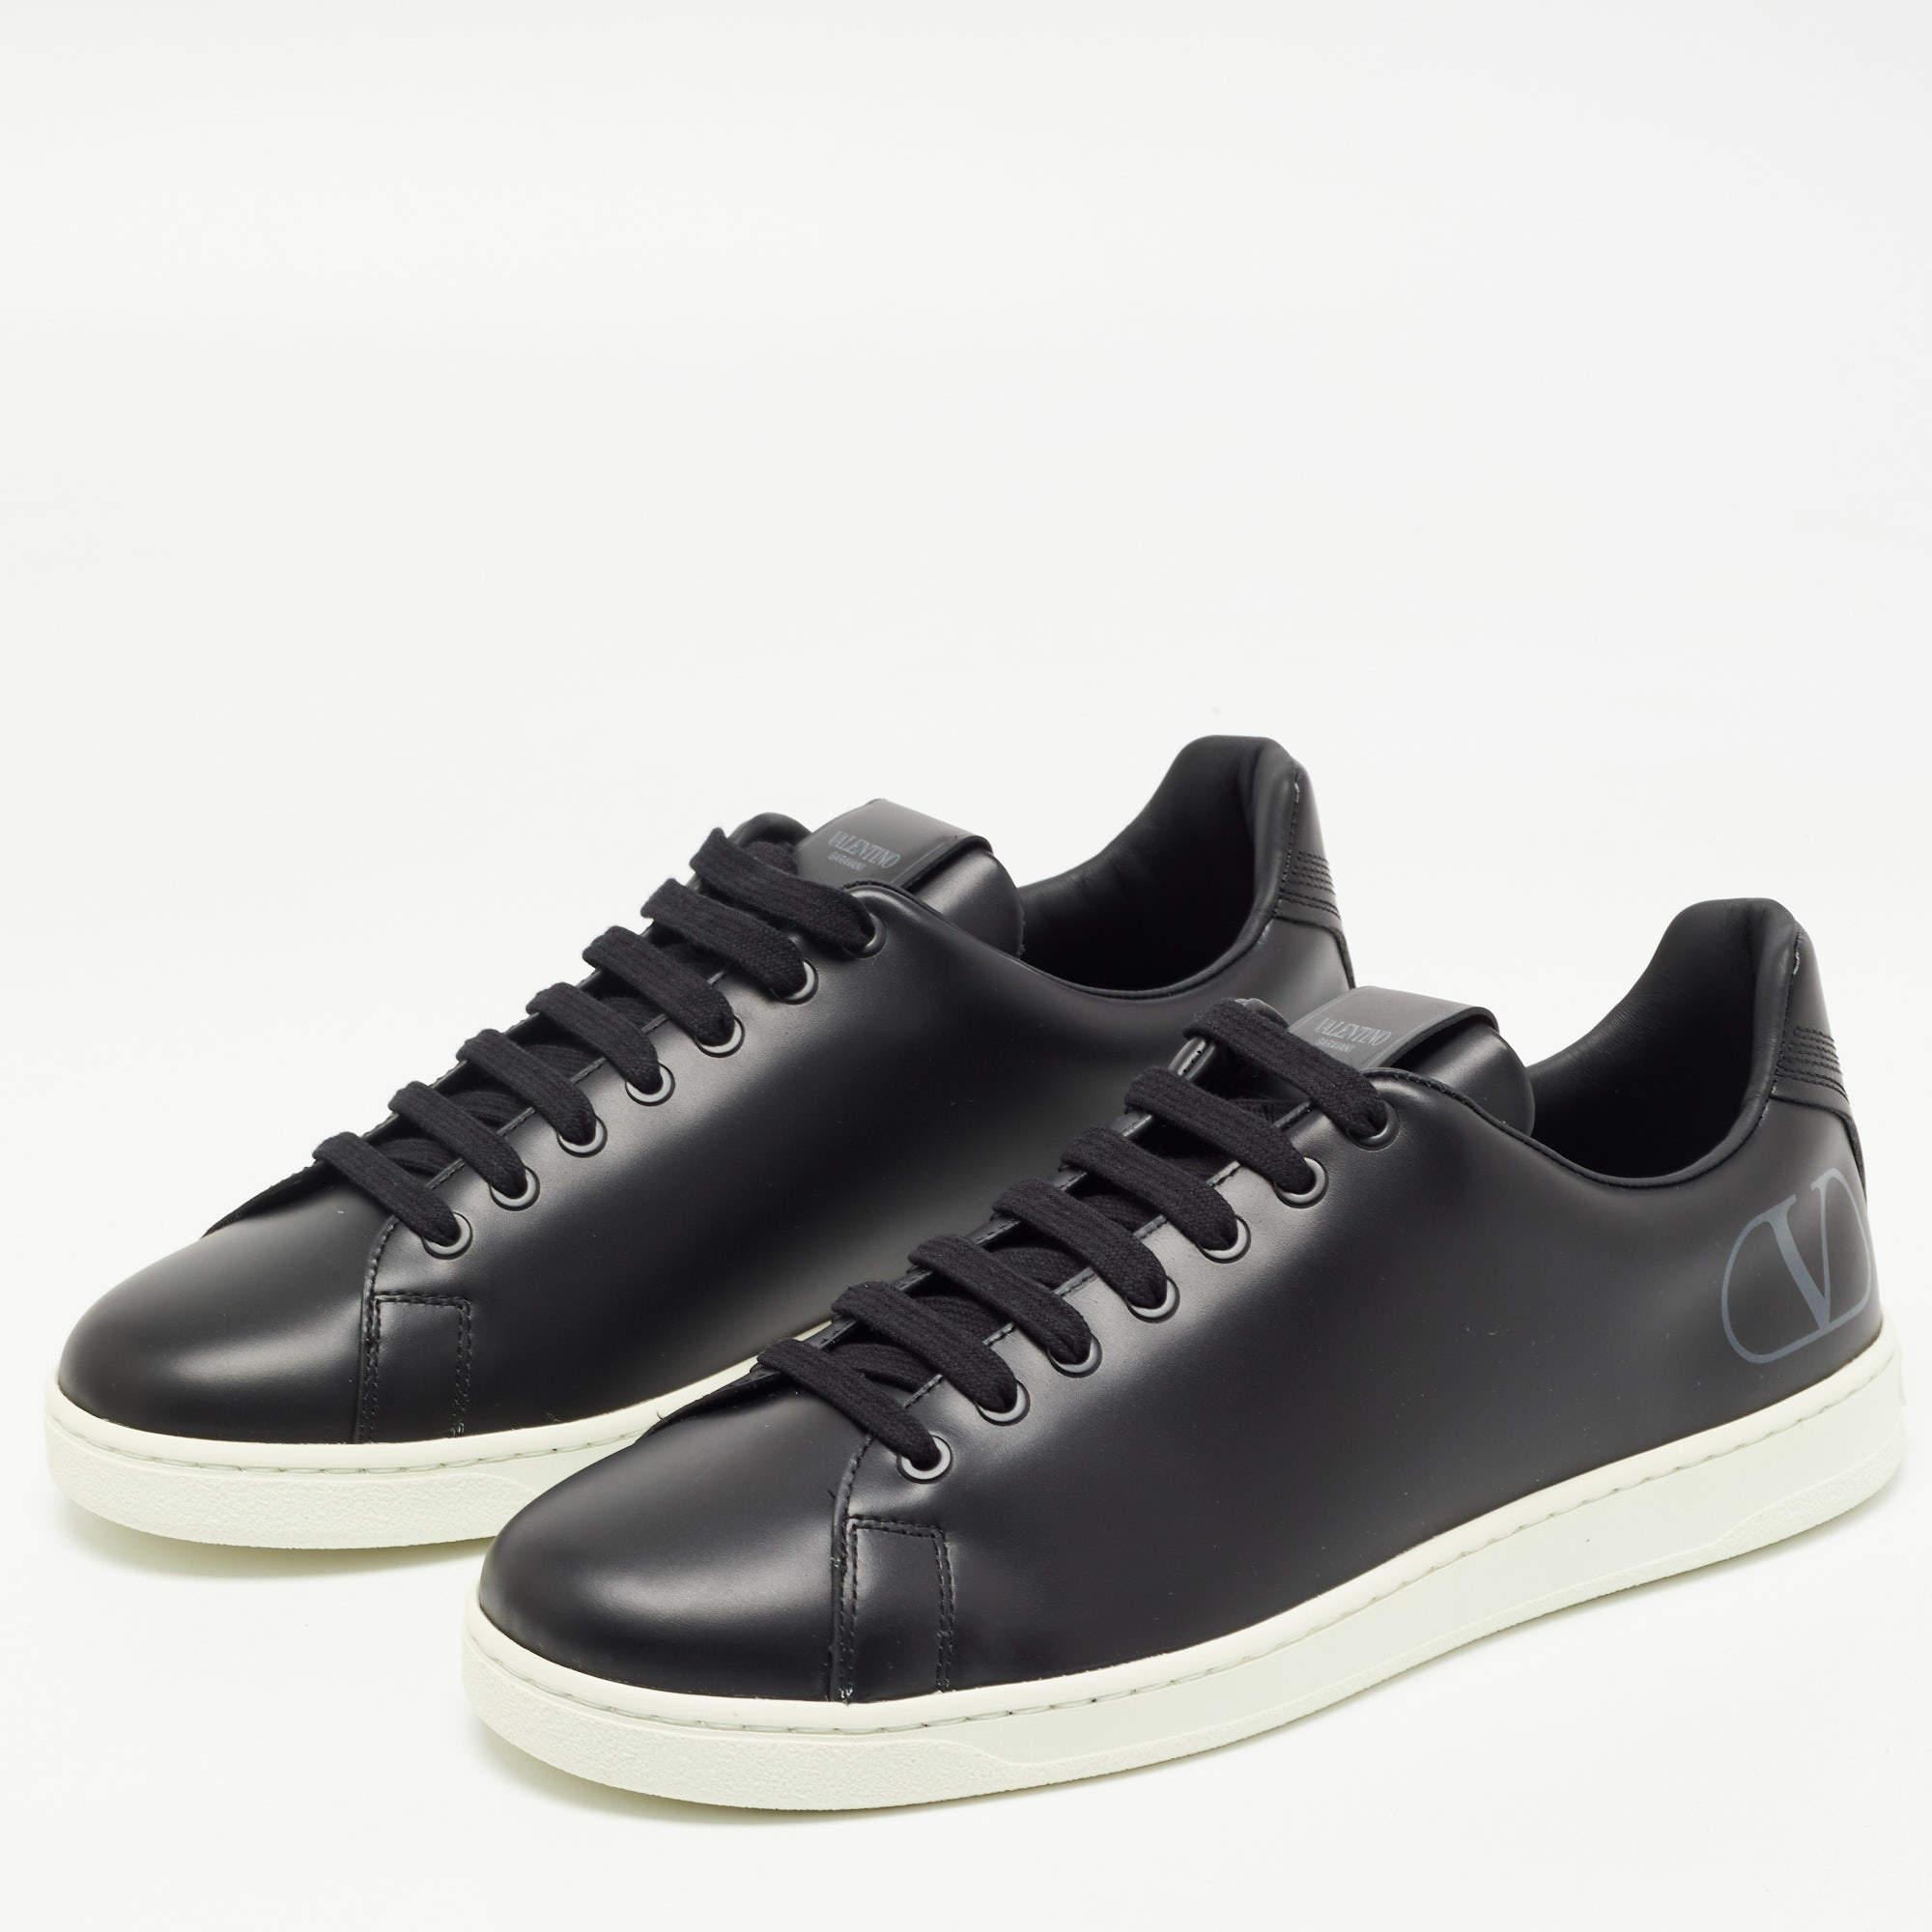 Valentino Black Leather VLogo Low Top Sneakers Size 42 1